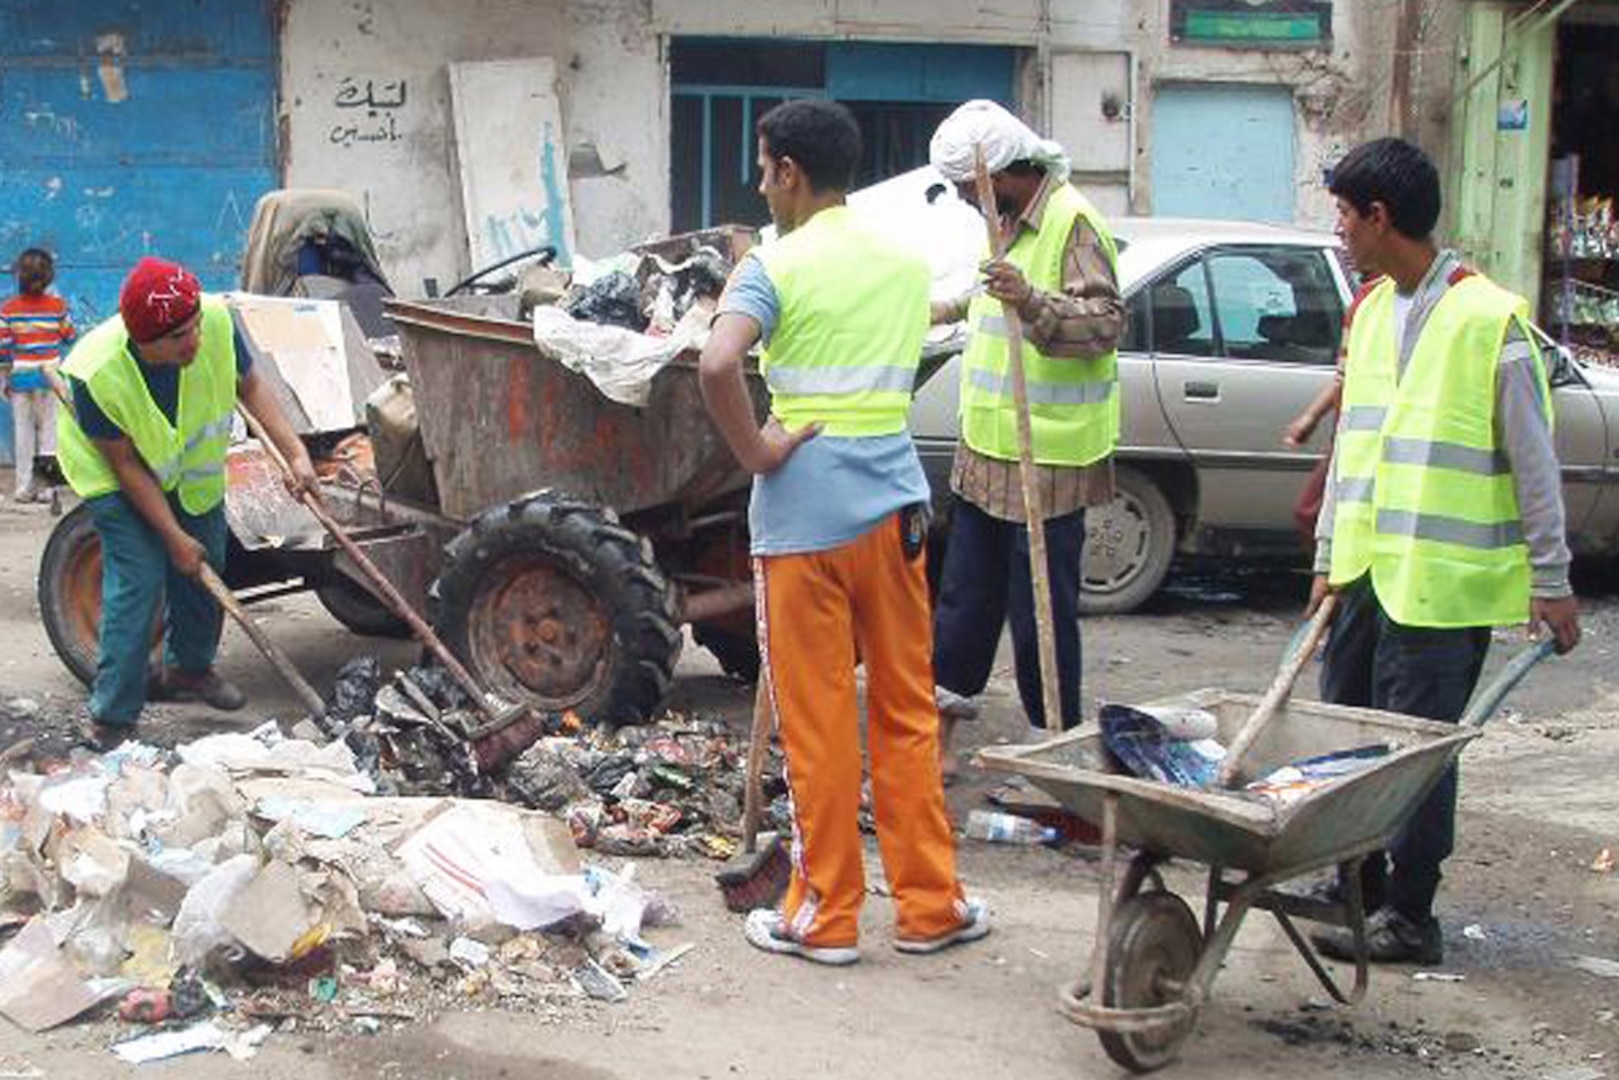 Residents of Baghdad's Rusafa district working for an Iraqi company clean up trash on a street Nov. 23, 2008. Leaders of Task Force Gold Spike contracted the company to remove trash as part of a mandate to improve living conditions for the people of Rusafa.